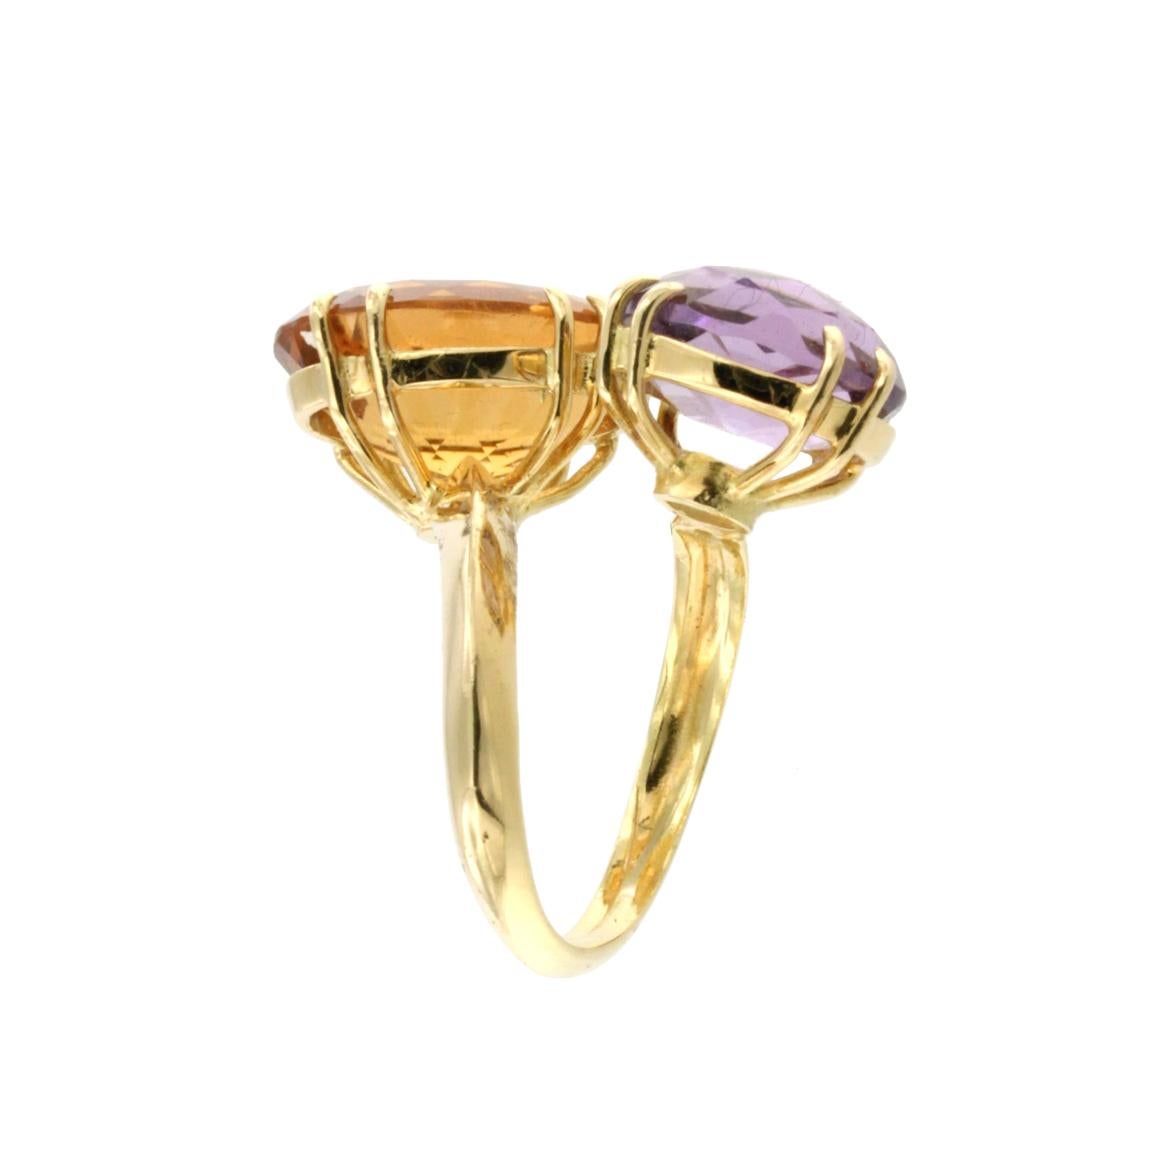  Combination of shapes and colors made a unique fashion and modern ring in 18k yellow gold with colored stones. Made in Italy by Stanoppi Jewellery since 1948.
Ring in 18k yellow gold with Amethyast (oval cut, size: 12x10 mm) and Citrine  (oval cut,